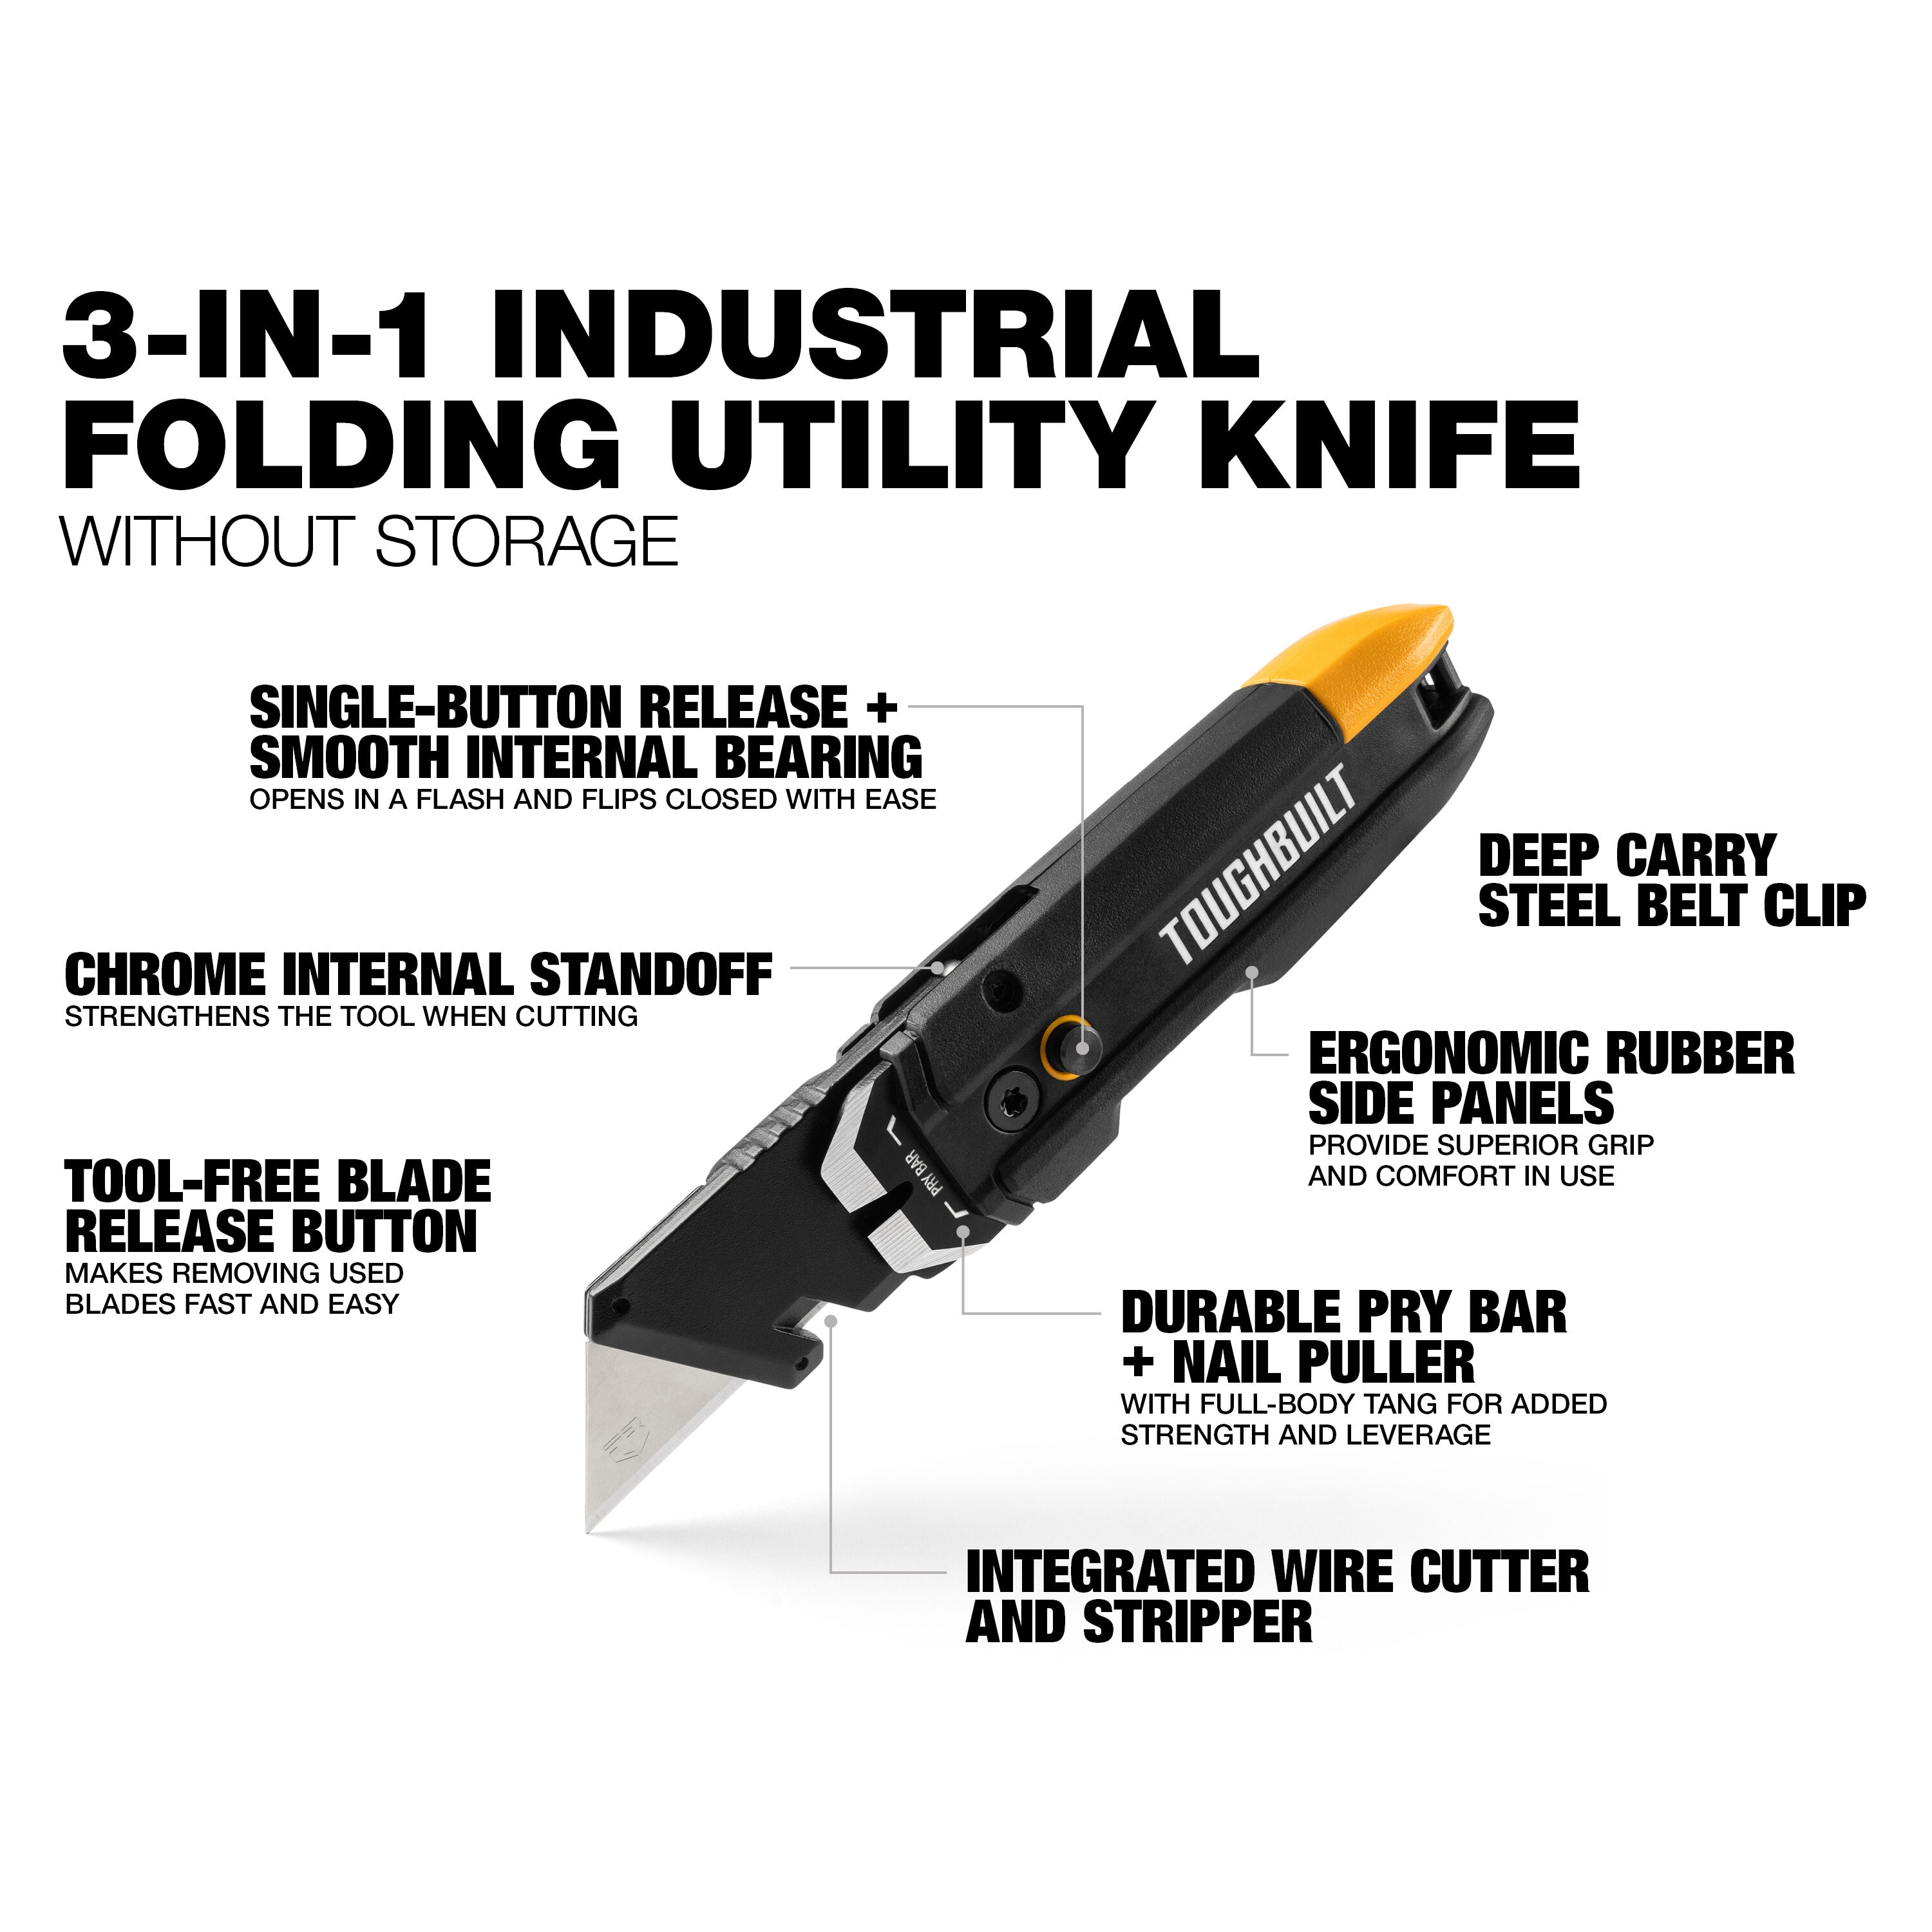 TOUGHBUILT Pry Bar 3/4-in 1-Blade Folding Utility Knife in the 